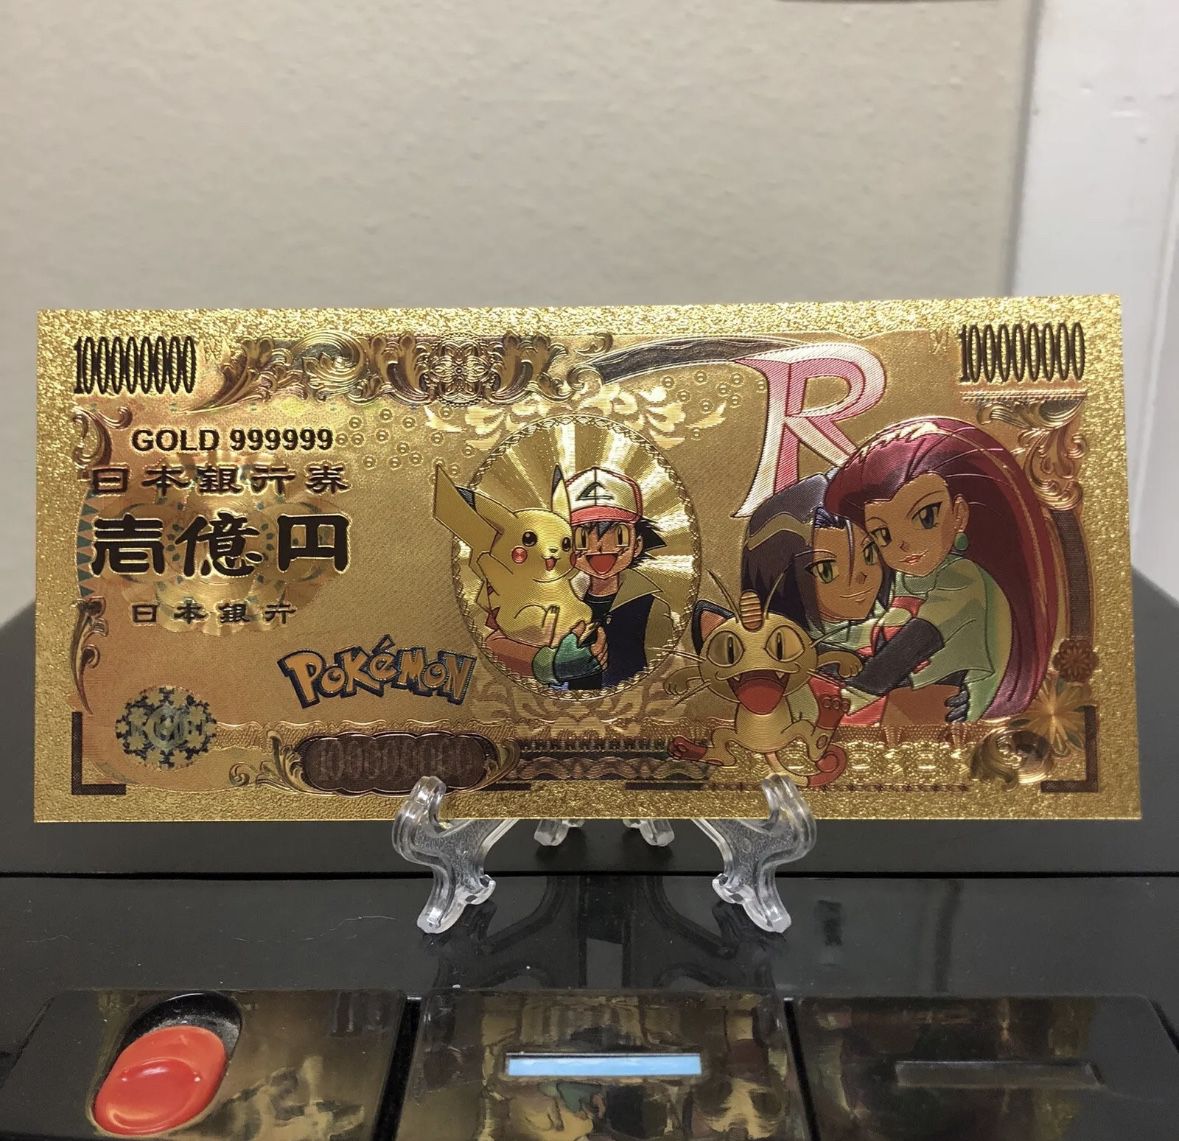 24k Gold Plated Pokemon Team Rocket Trainer Jessie And James With Meowth And Pikachu Banknote